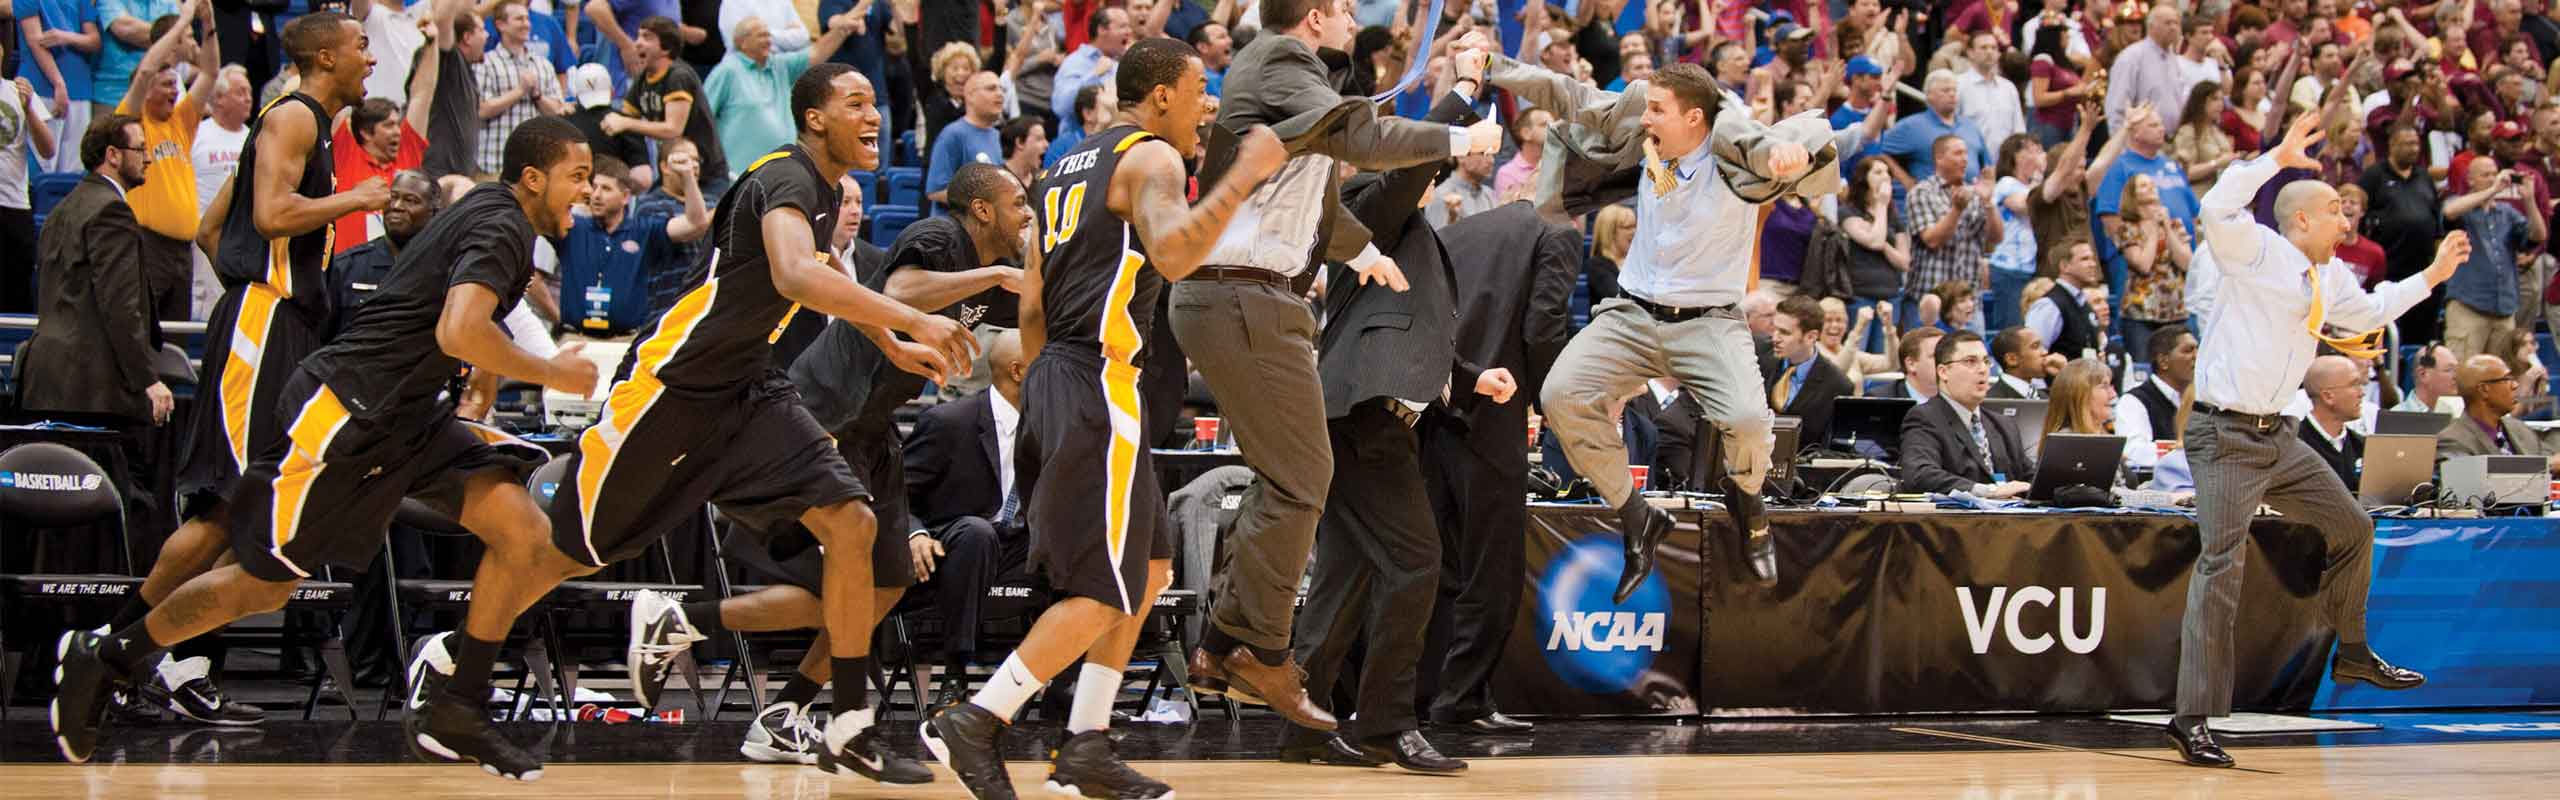 VCU players and coaches erupt as the Rams upset Florida State to advance to the Elite Eight in the 2011 Final Four tournament.